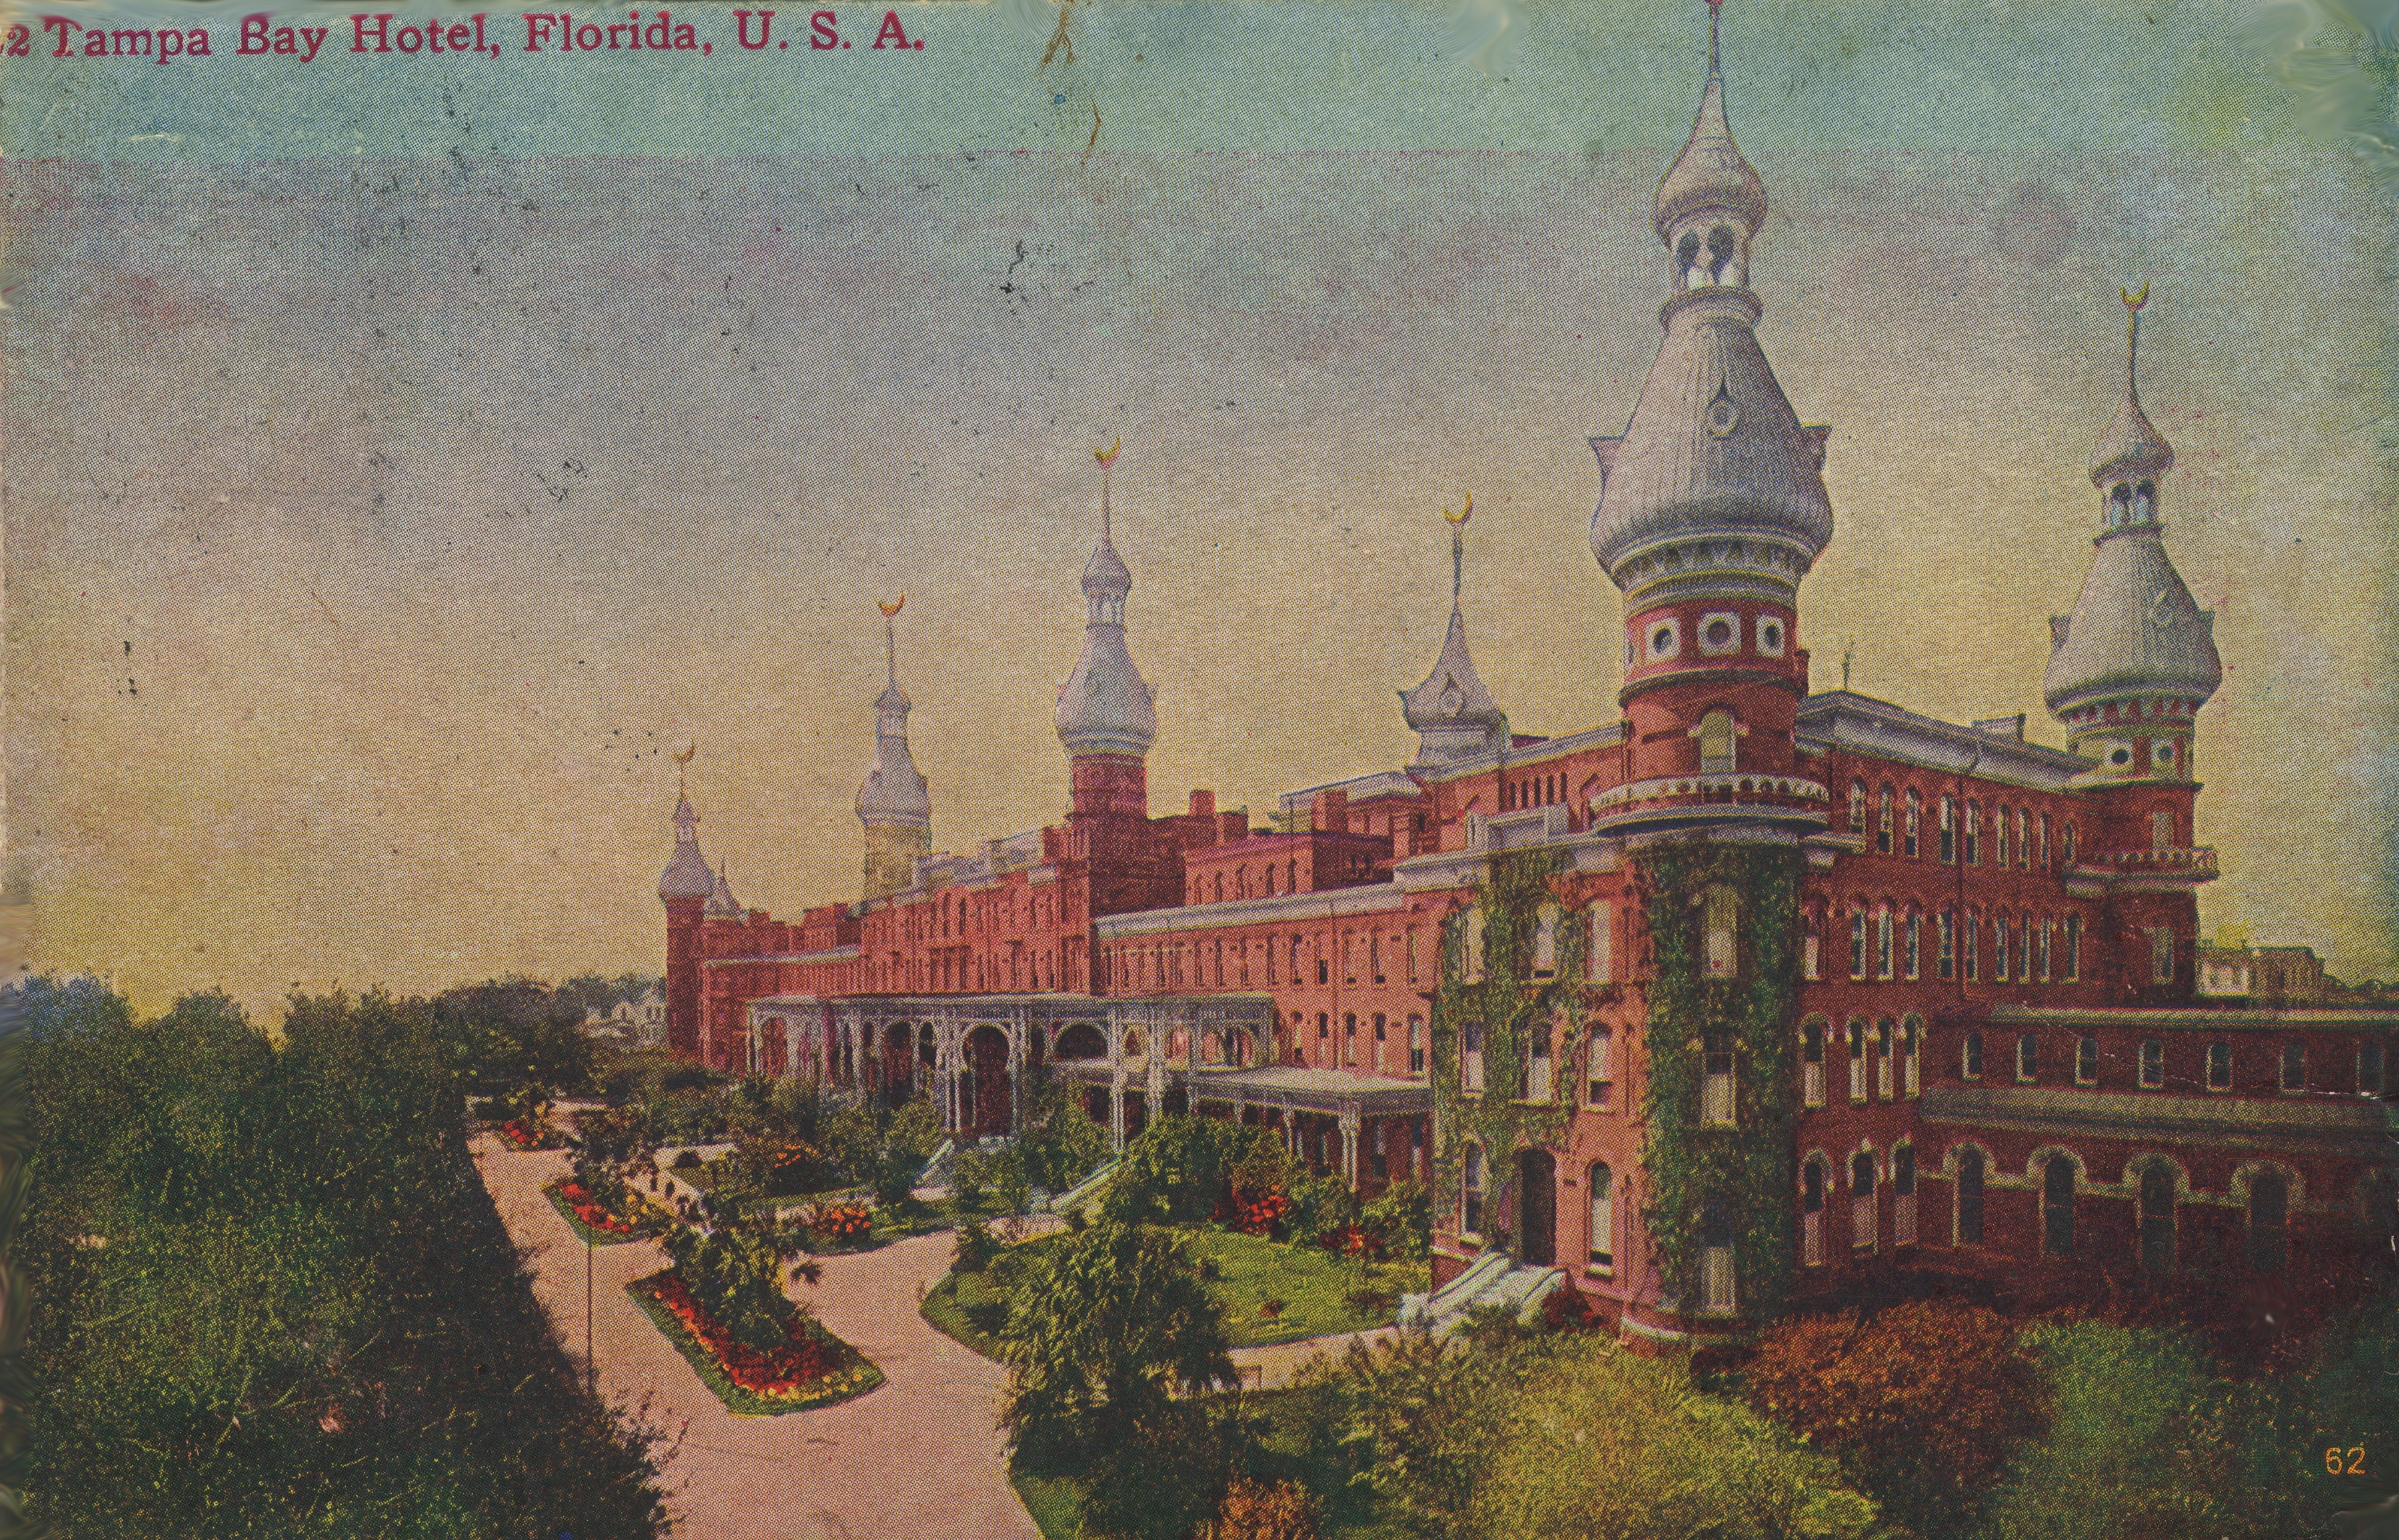 Long view of ornate Hotel, topped with minarets